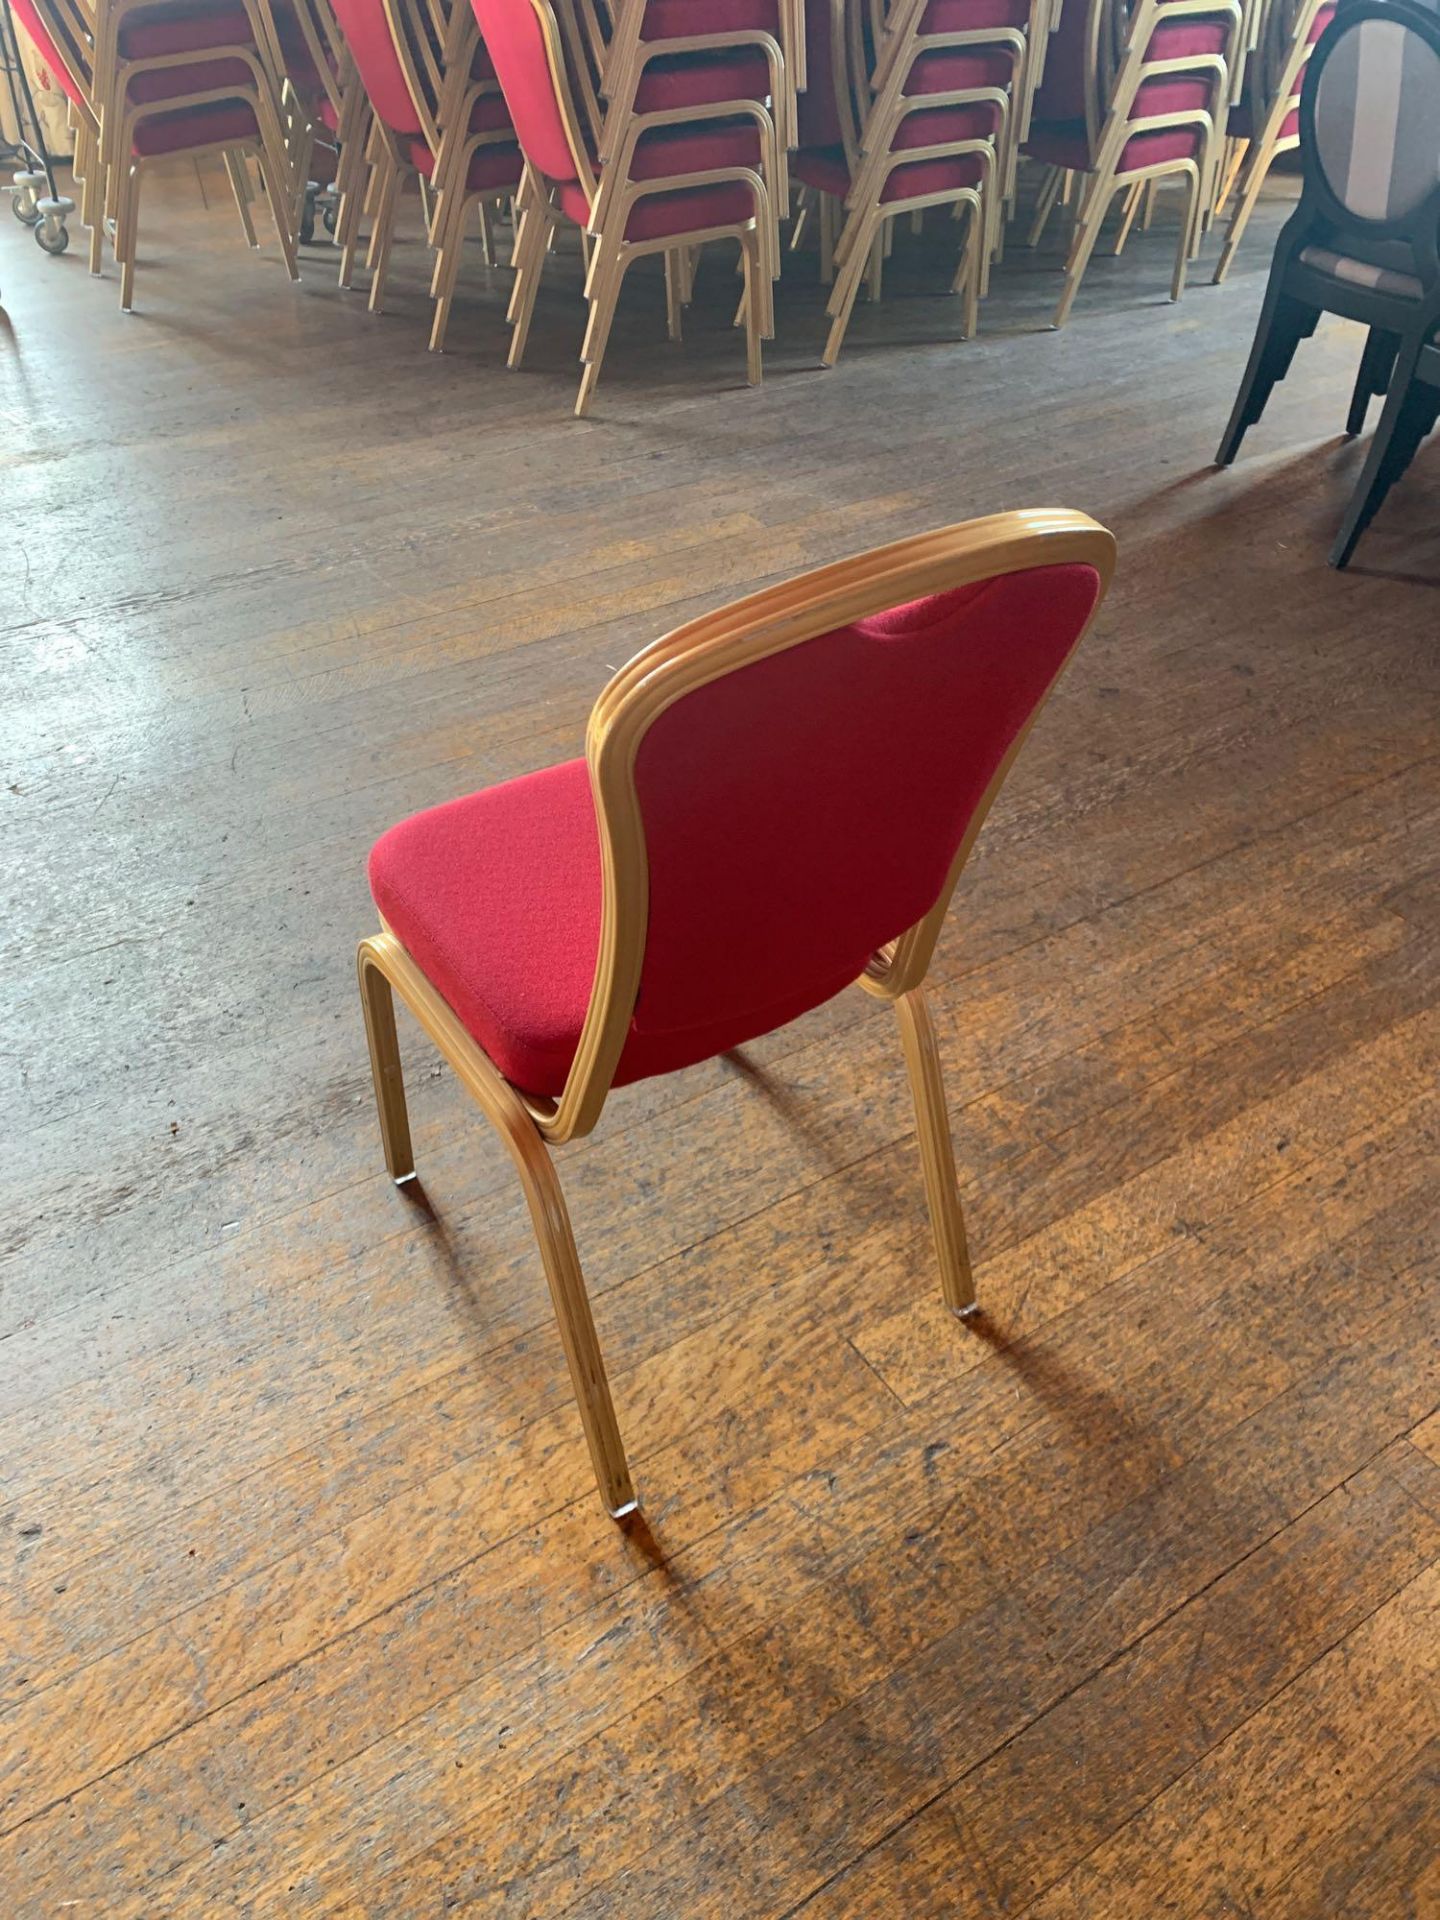 Burgess Furnitures Furniture CH569 Stacking Banquet Chair Red And Gold x 10 45 x 43 x 99cm - Image 3 of 3